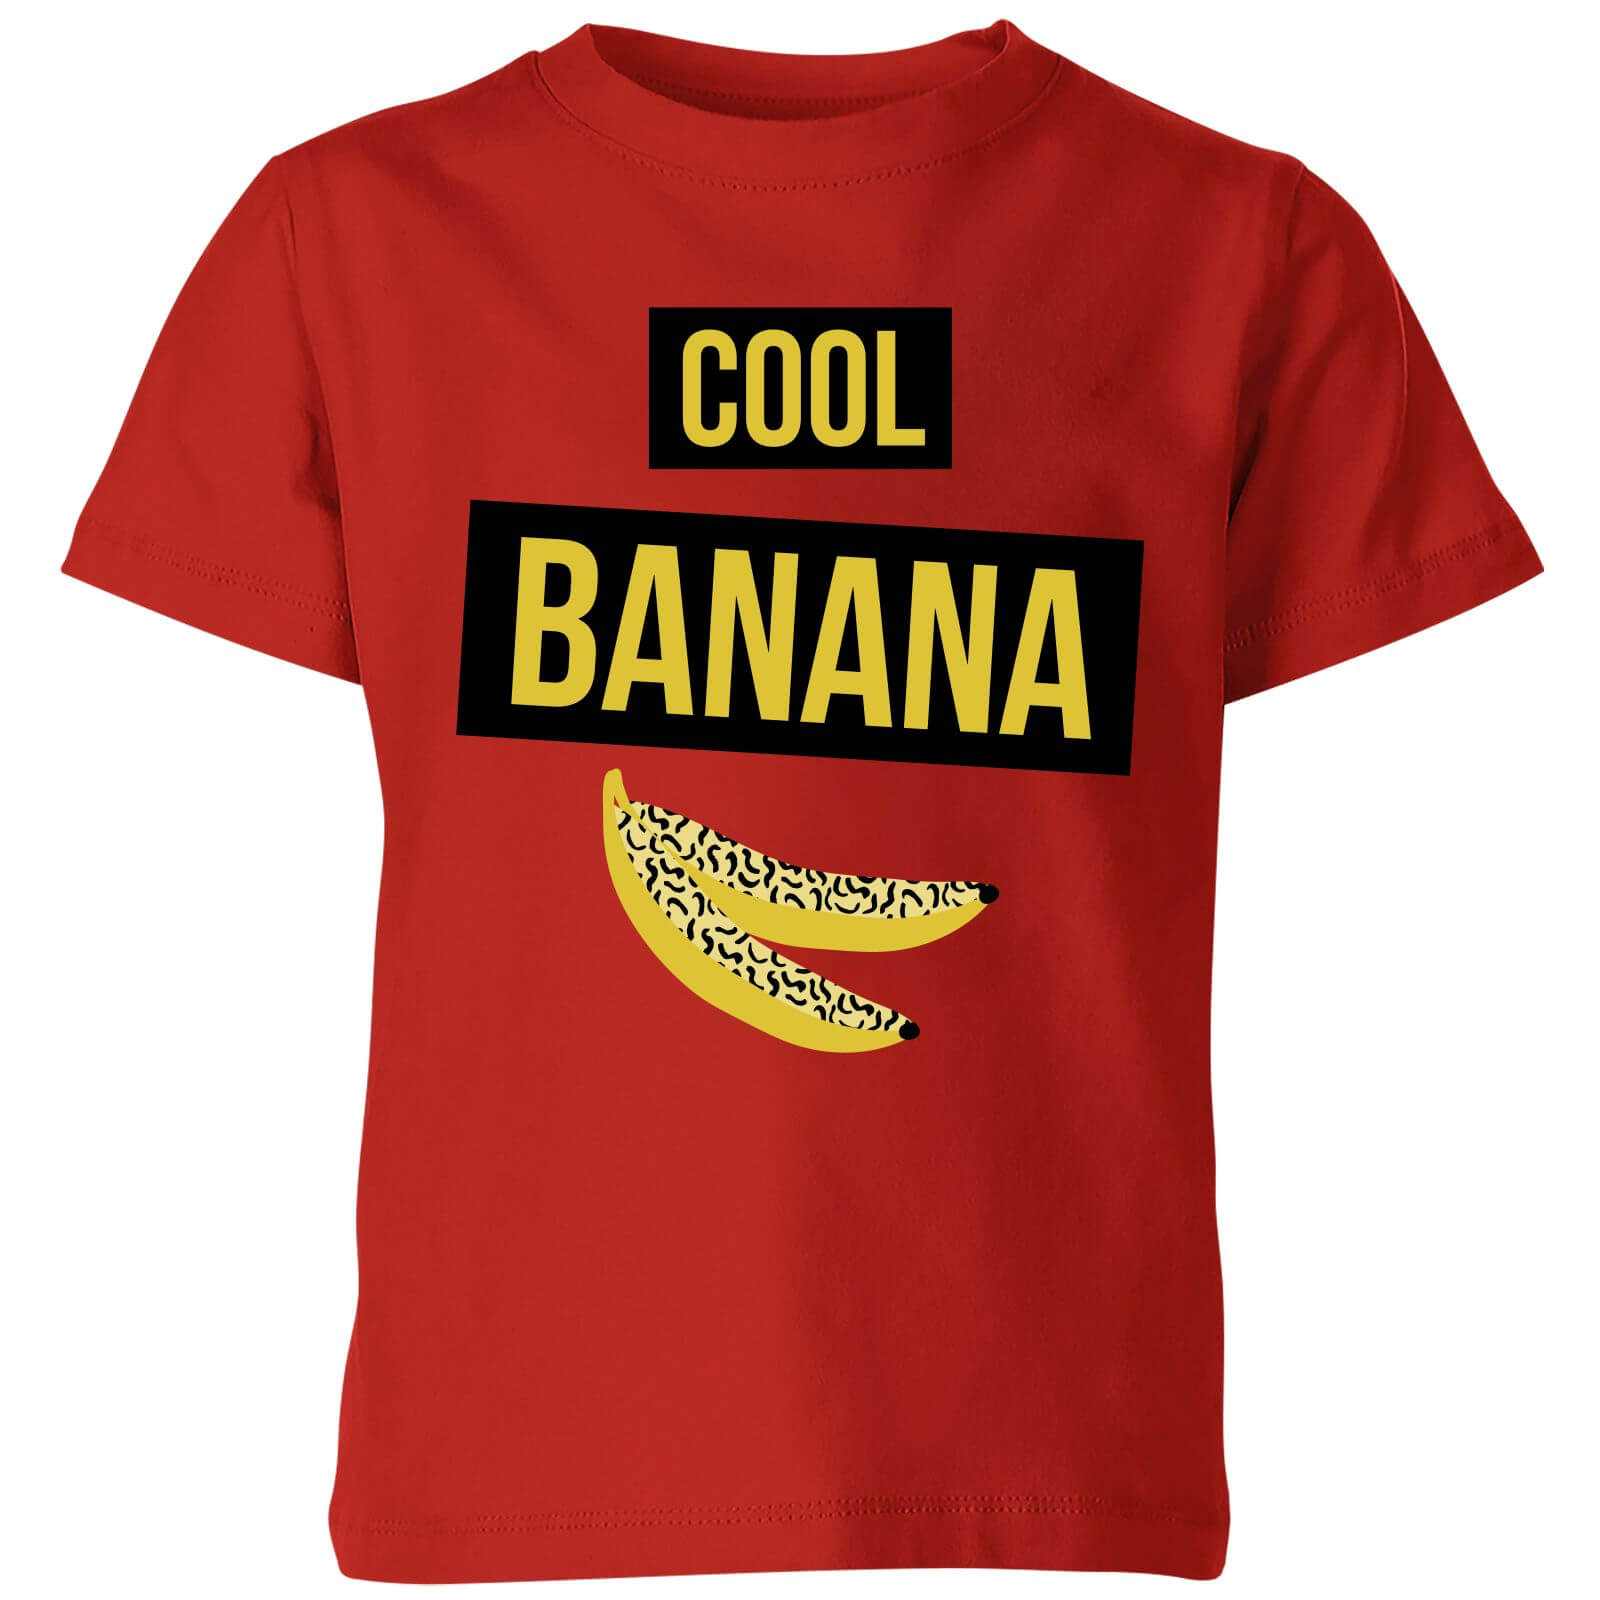 My Little Rascal Cool Banana Kids' T-Shirt - Red - 3-4 Years - Red